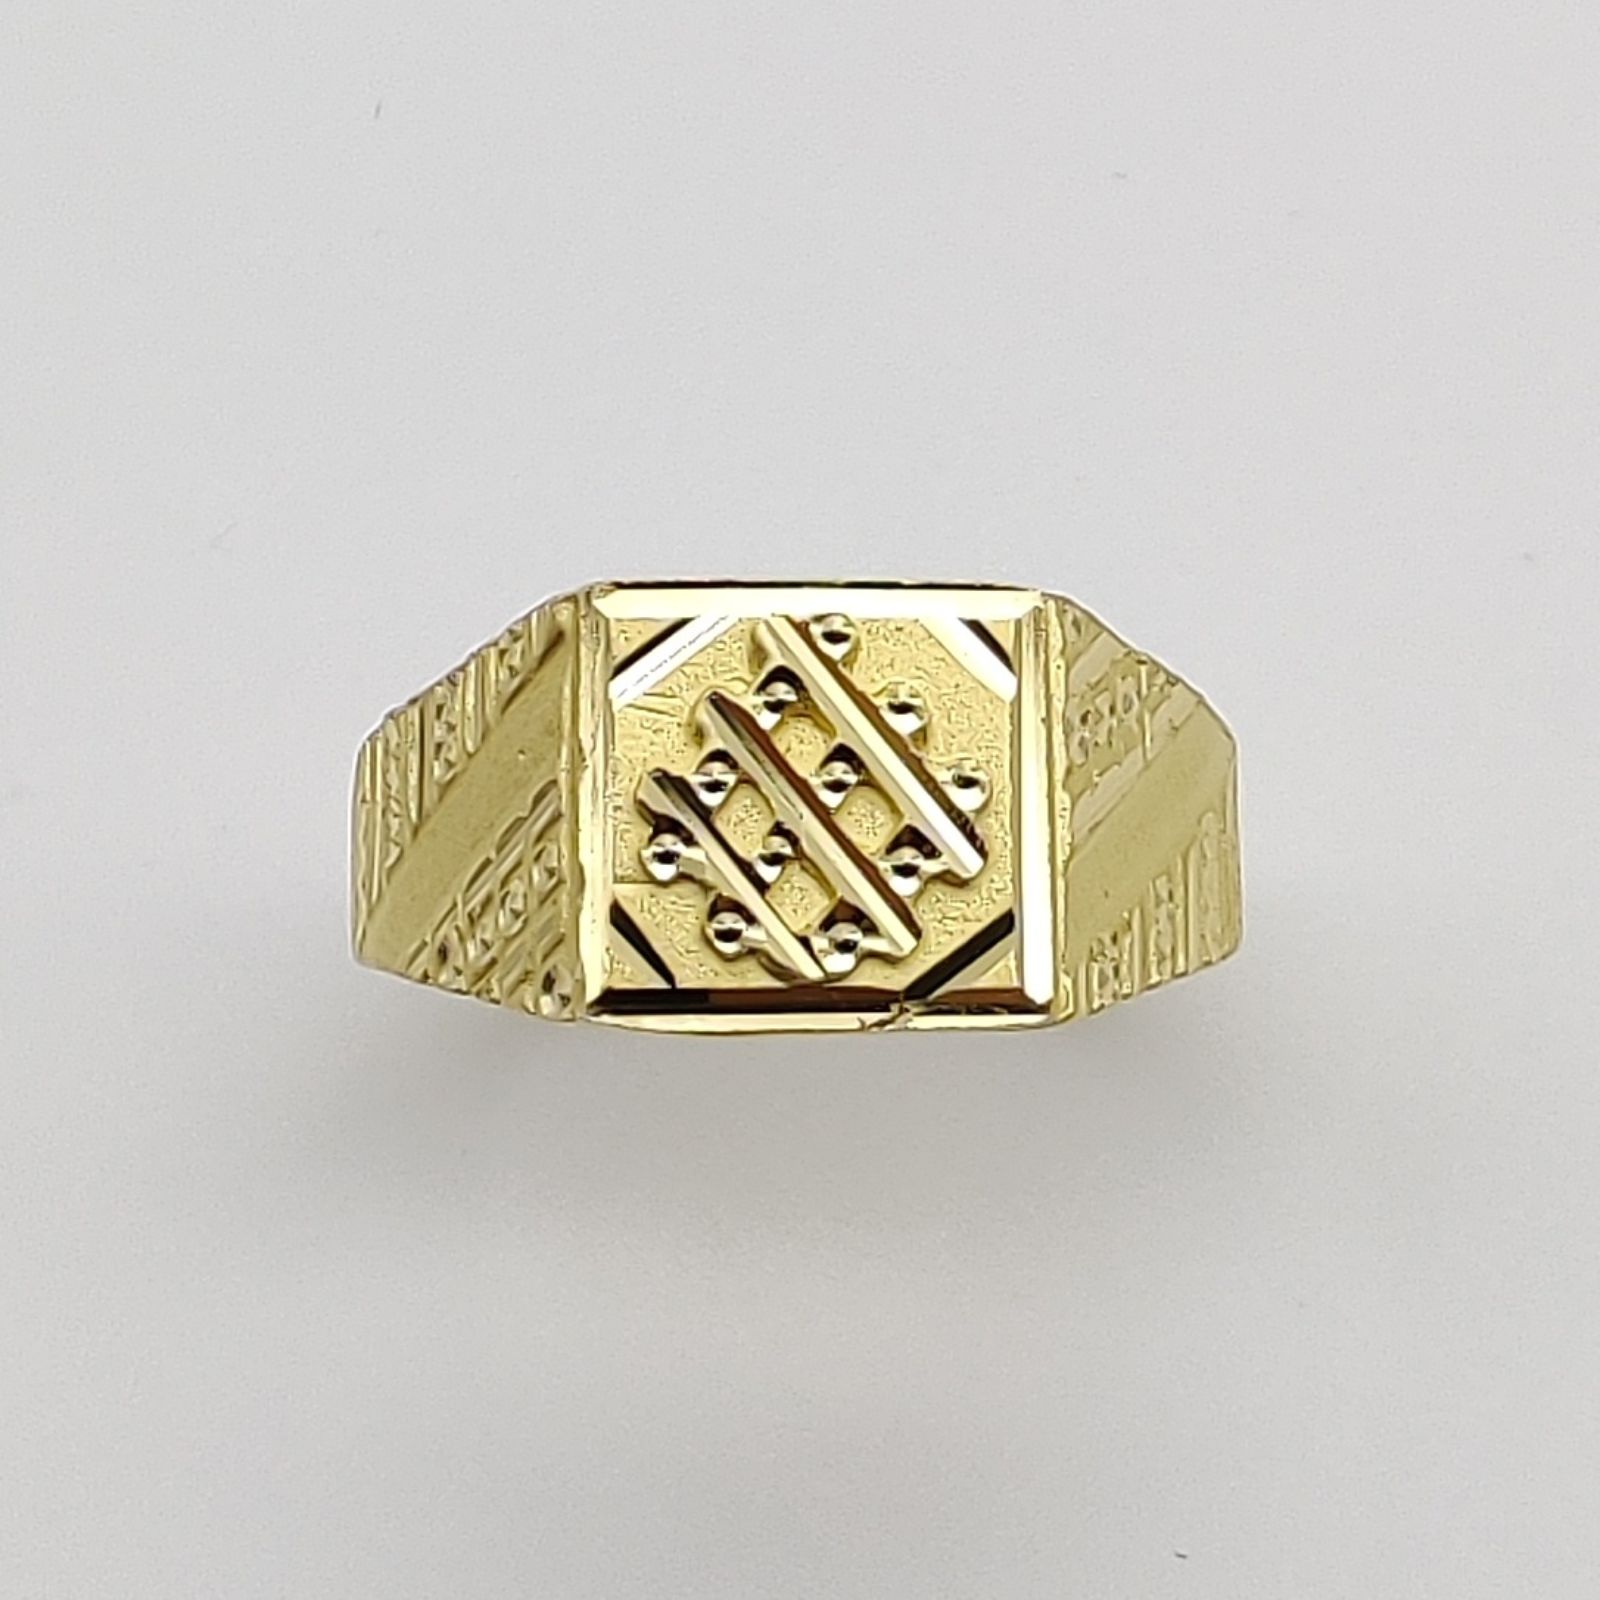 Buy quality 916 gold fancy casting Gents ring in Ahmedabad